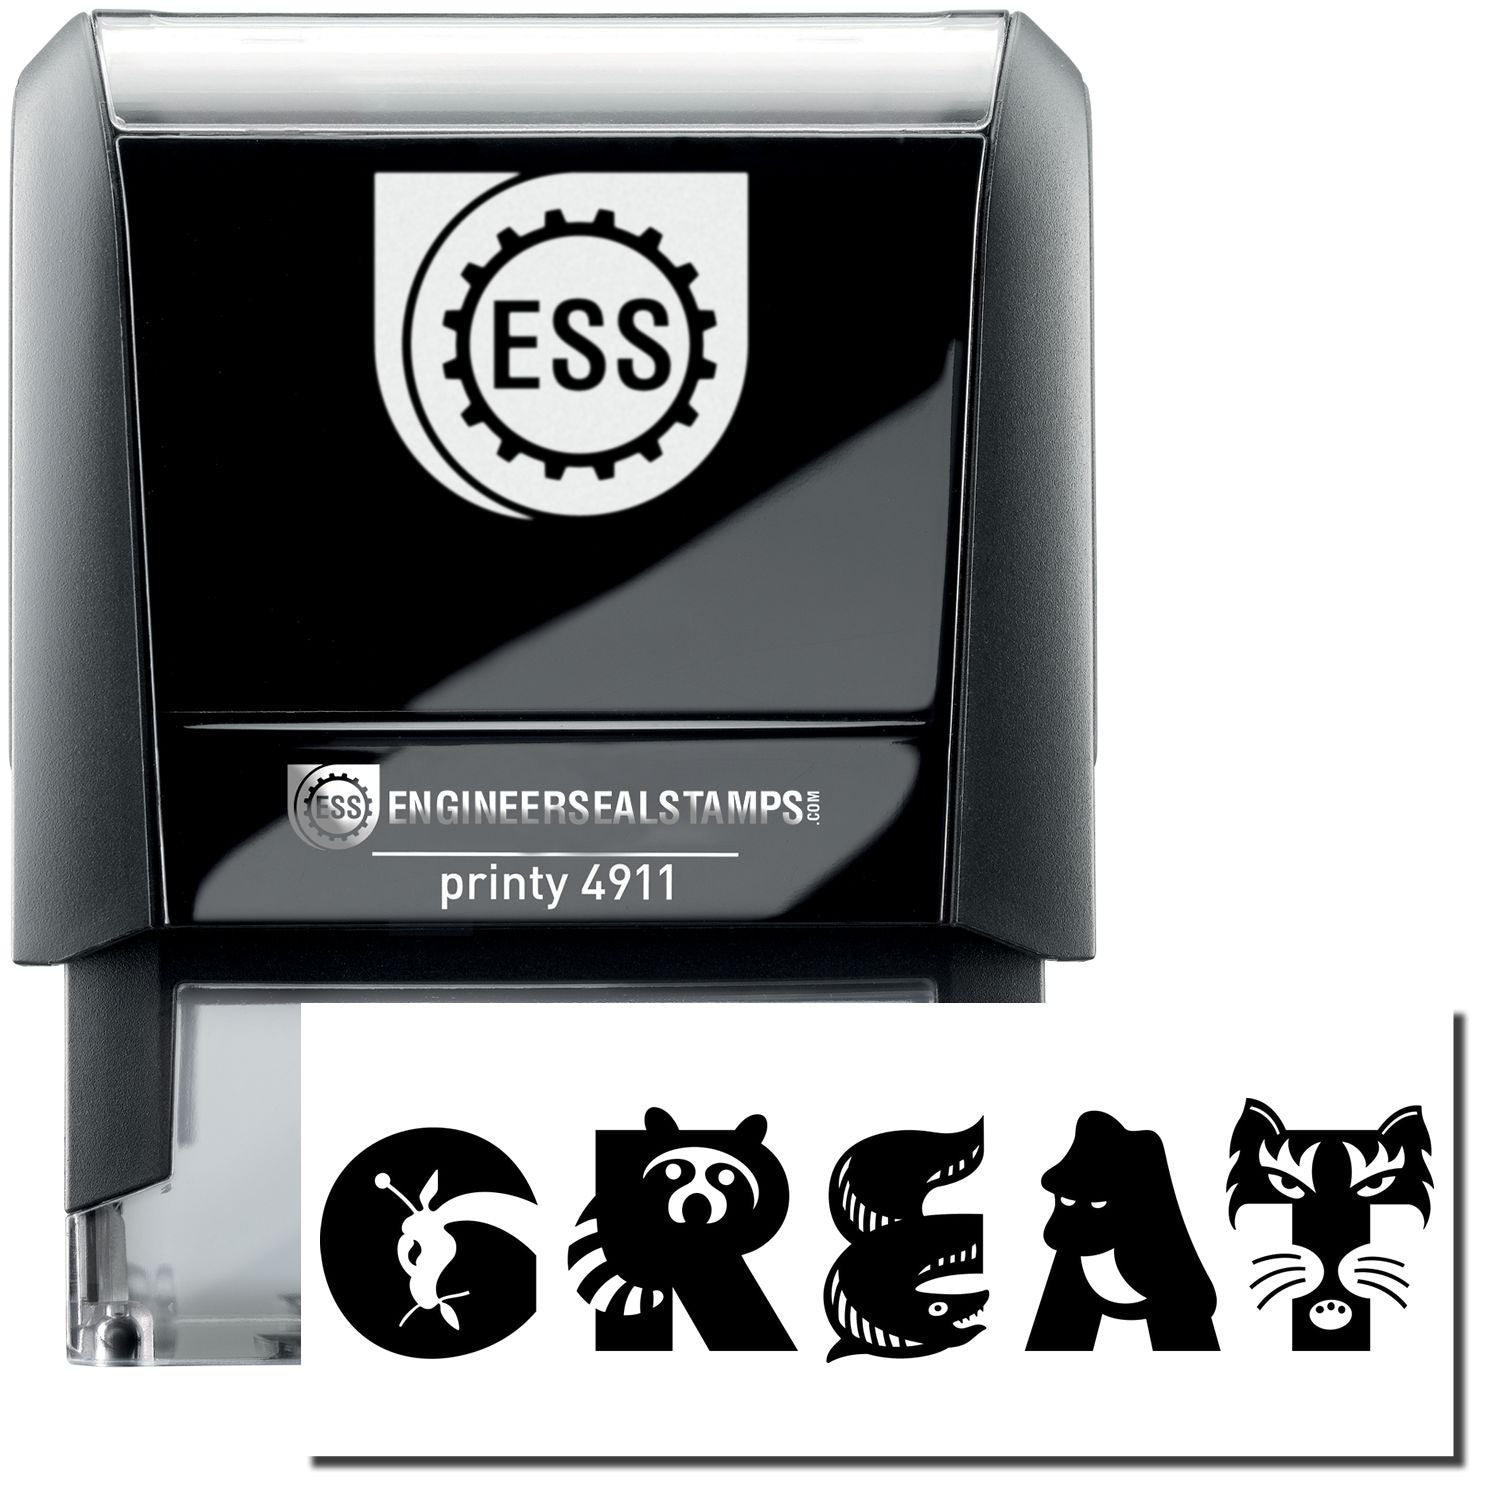 A self-inking stamp with a stamped image showing how the word "GREAT" (Each letter resembles an animal, including a giraffe, raccoon, eel, ape, and tiger) is displayed after stamping.